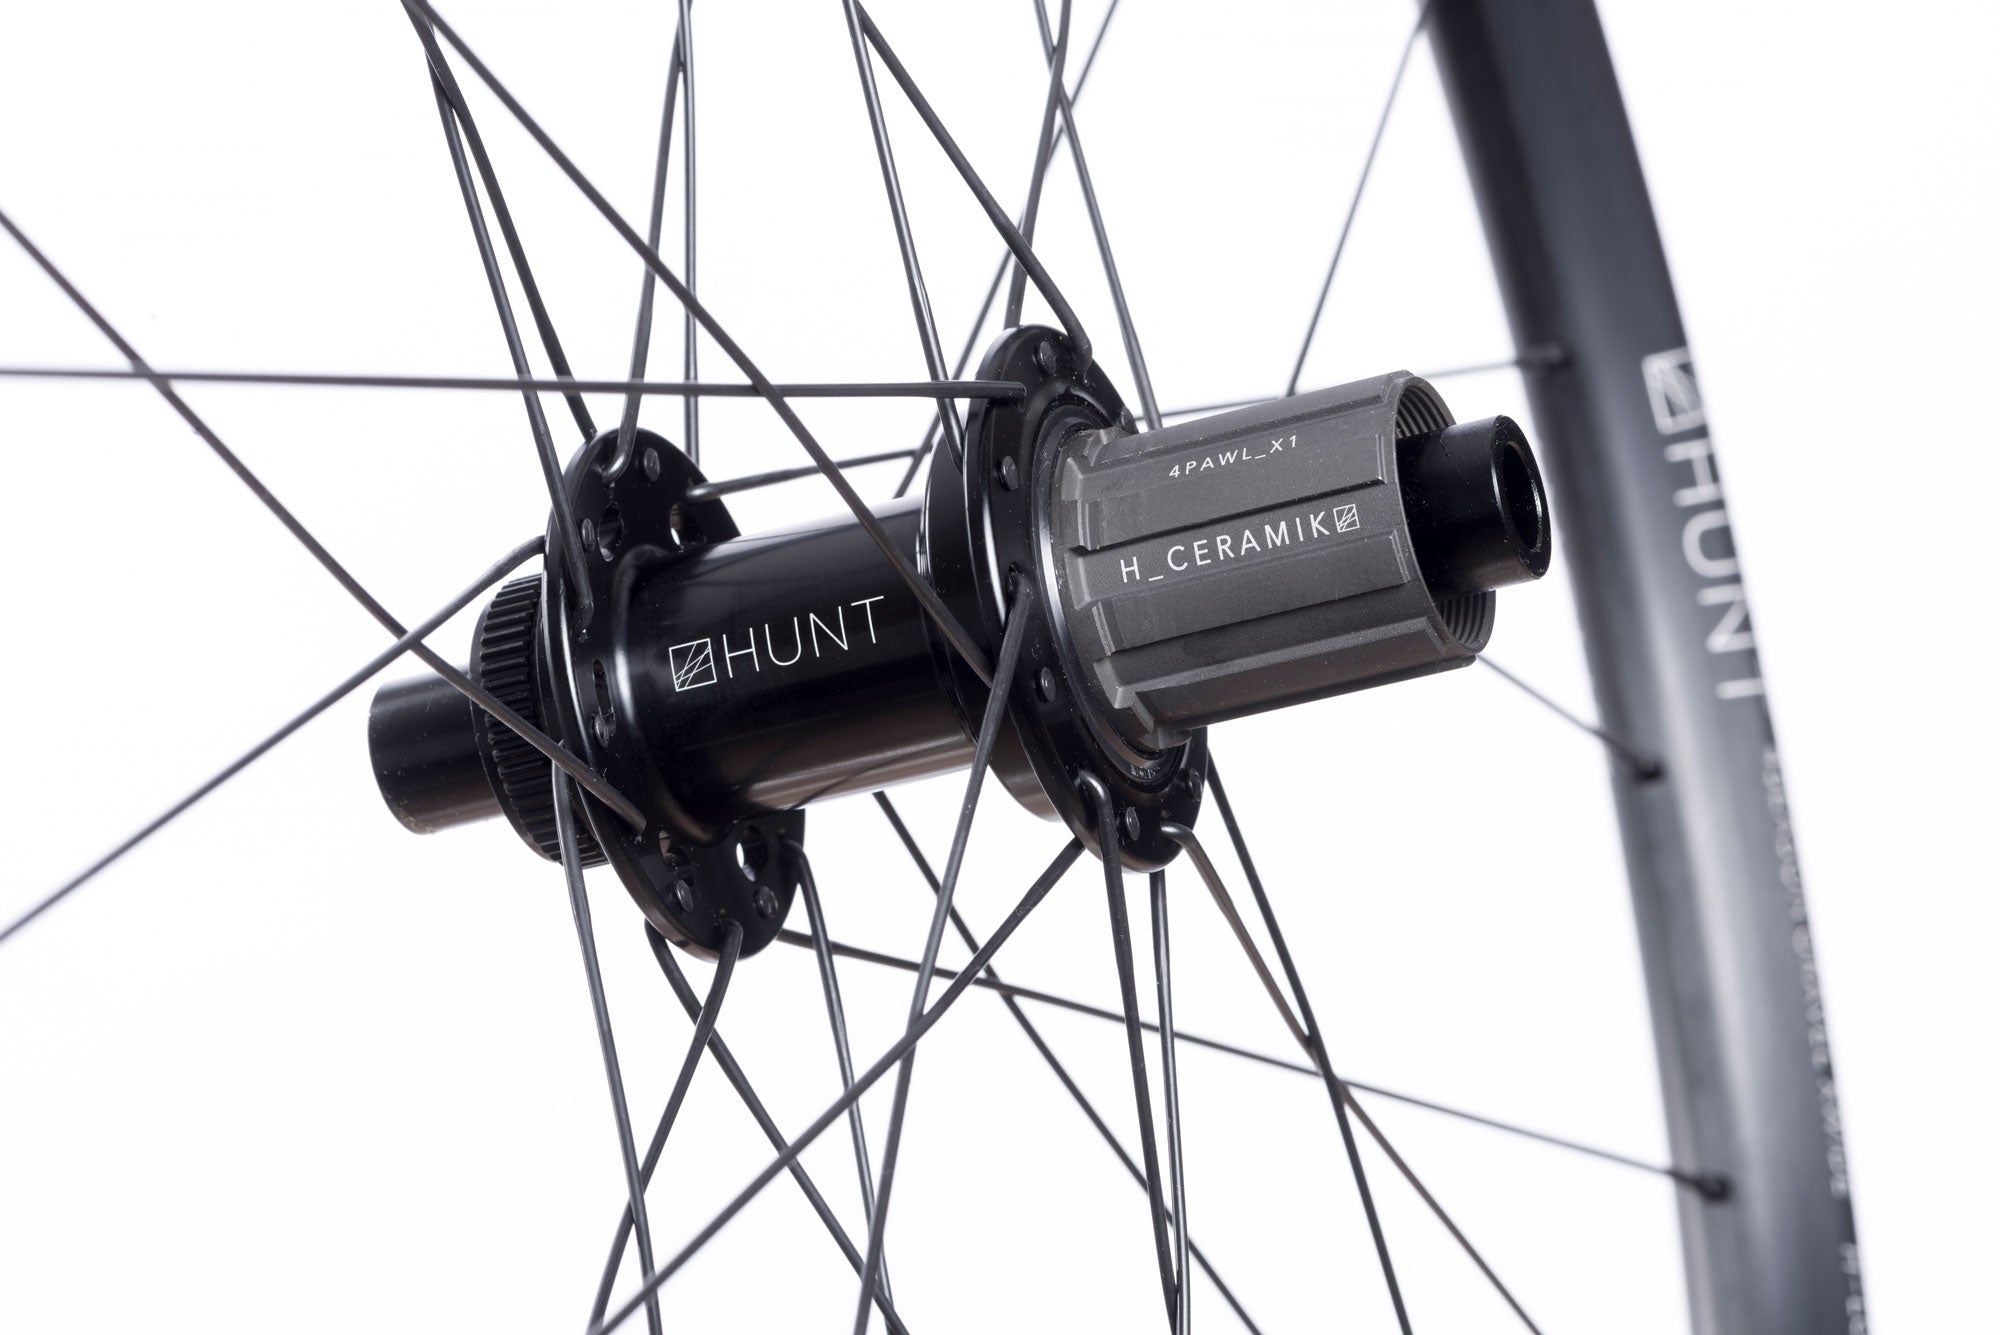 <h1>Freehub Body</h1><i>Durability is a theme for HUNT, as time and money you spend fixing is time and money you cannot spend riding or upgrading your bikes. This is especially important for a 4 Season bike you use regularly in harsh conditions. As a result, the freehub features our H_CERAMIK coating to provide excellent durability against cassette sprocket damage often seen on standard alloy freehub bodies.</i>